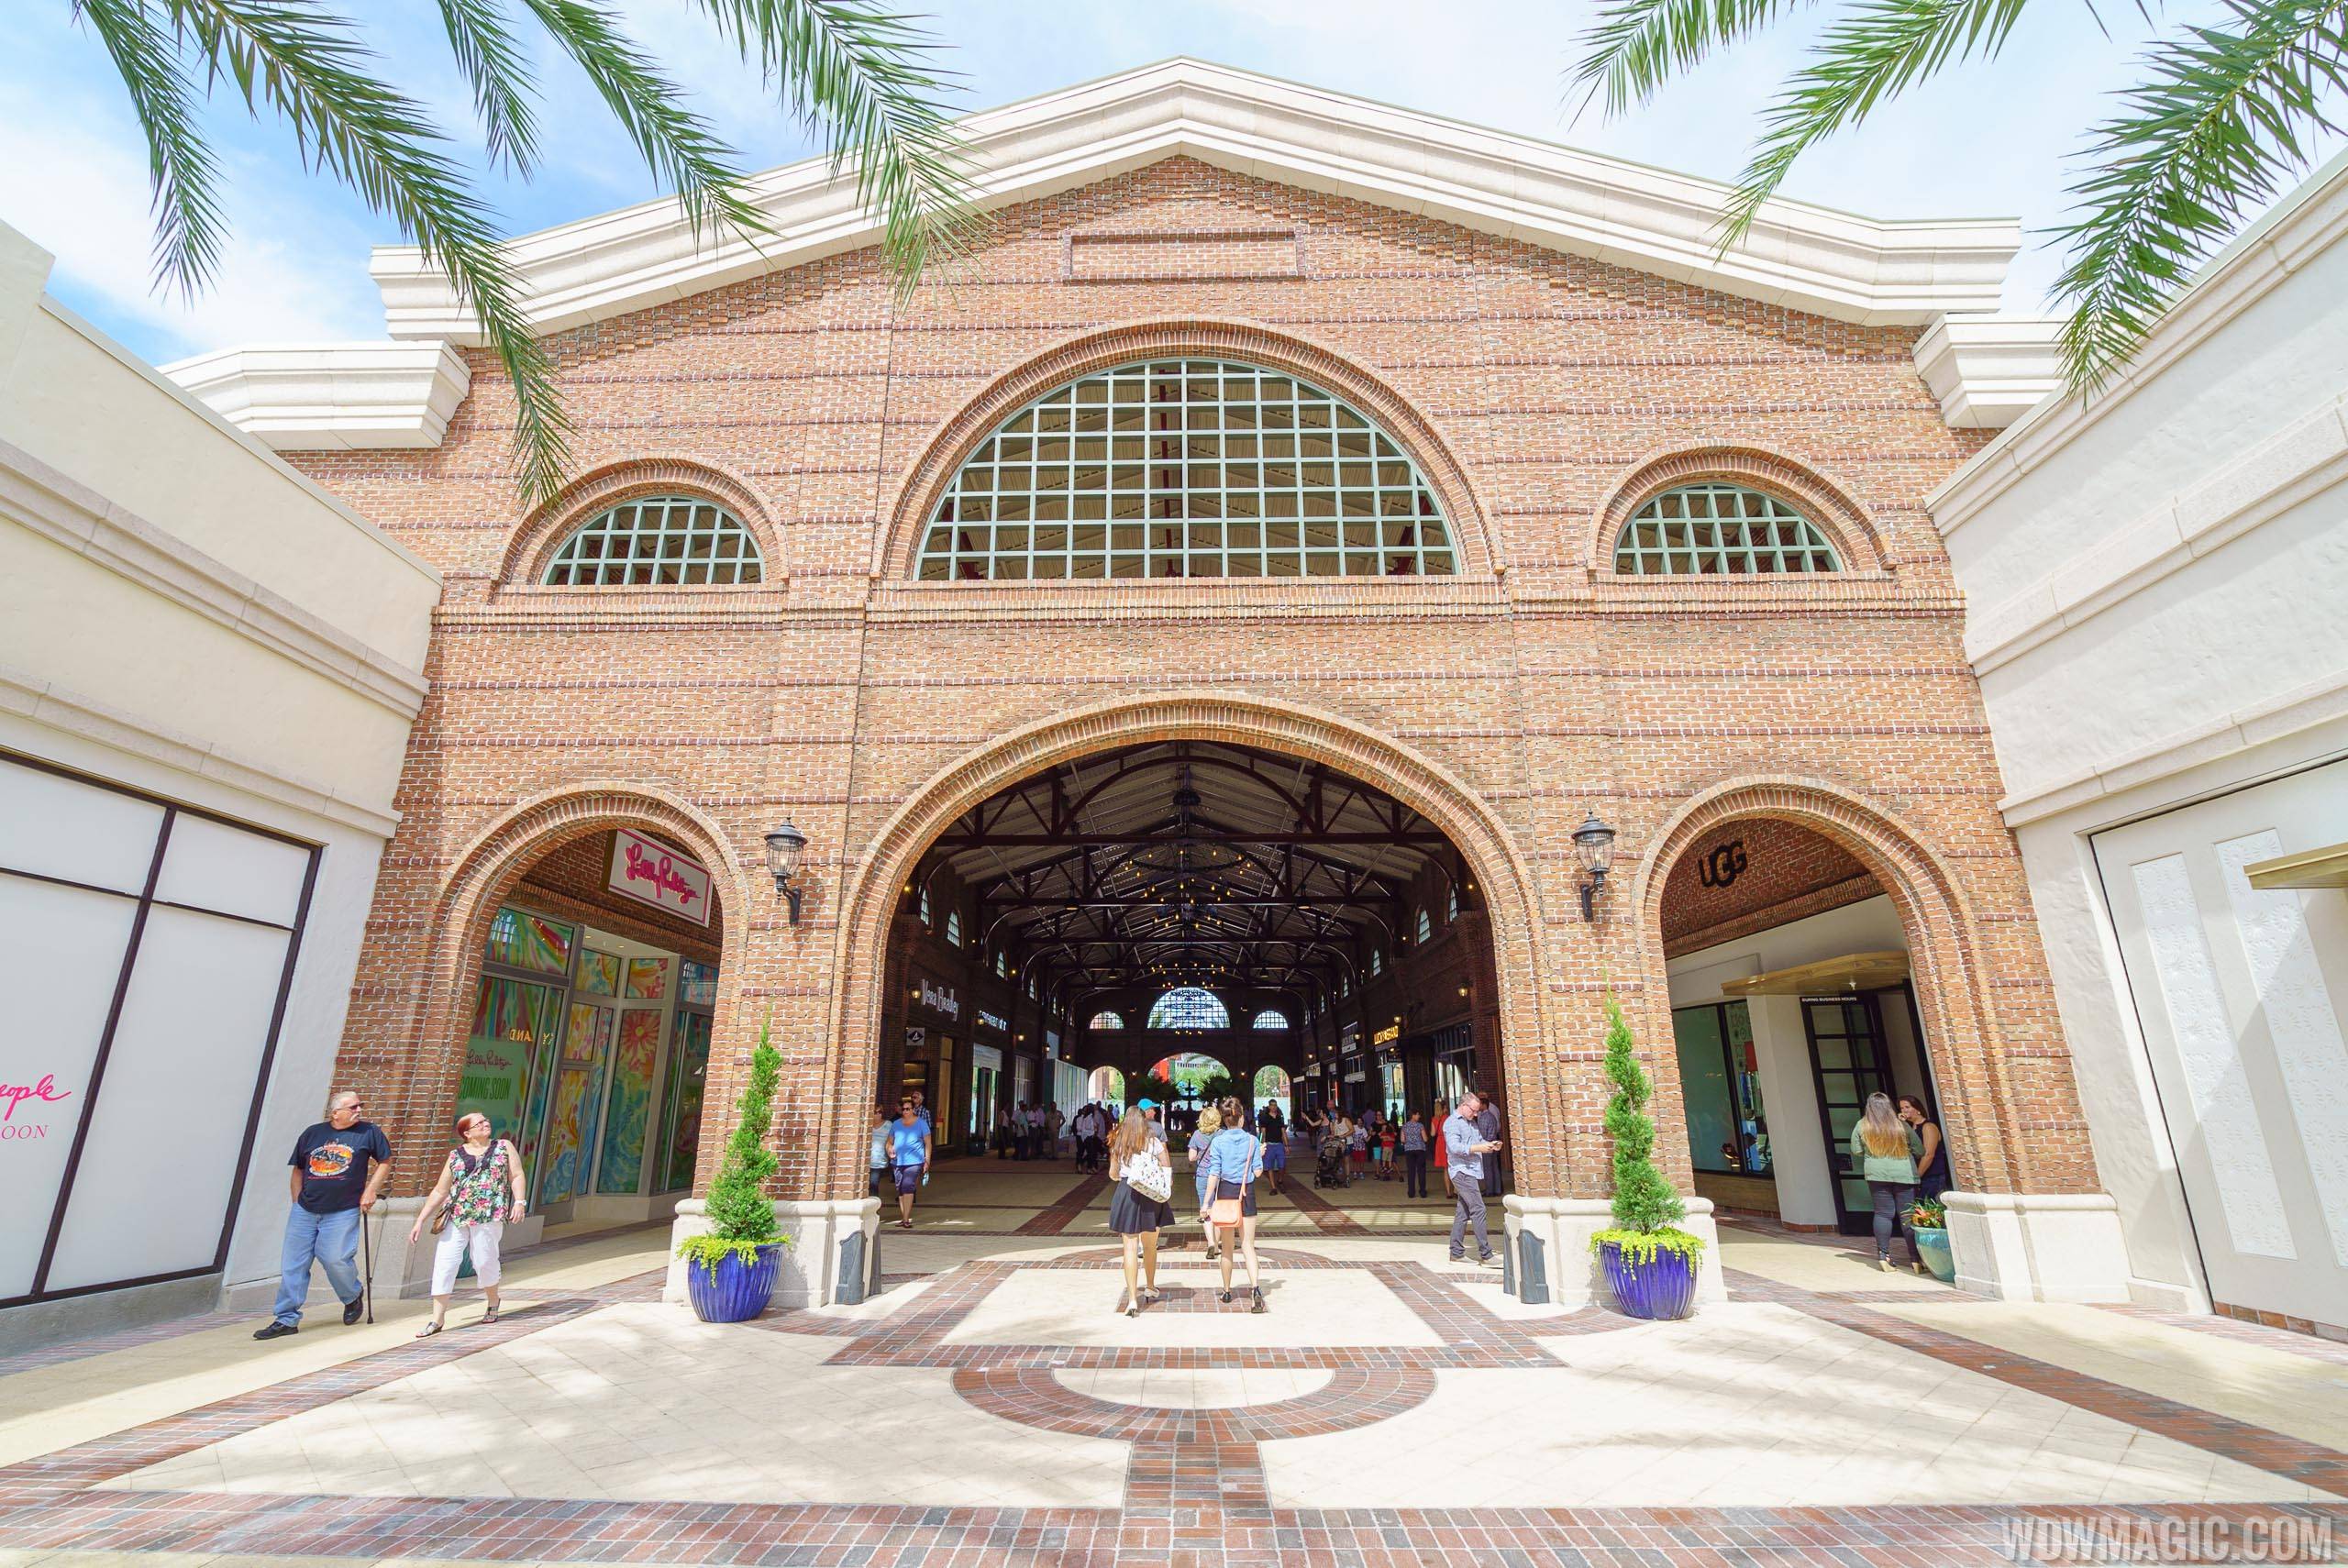 The Town Center at Disney Springs